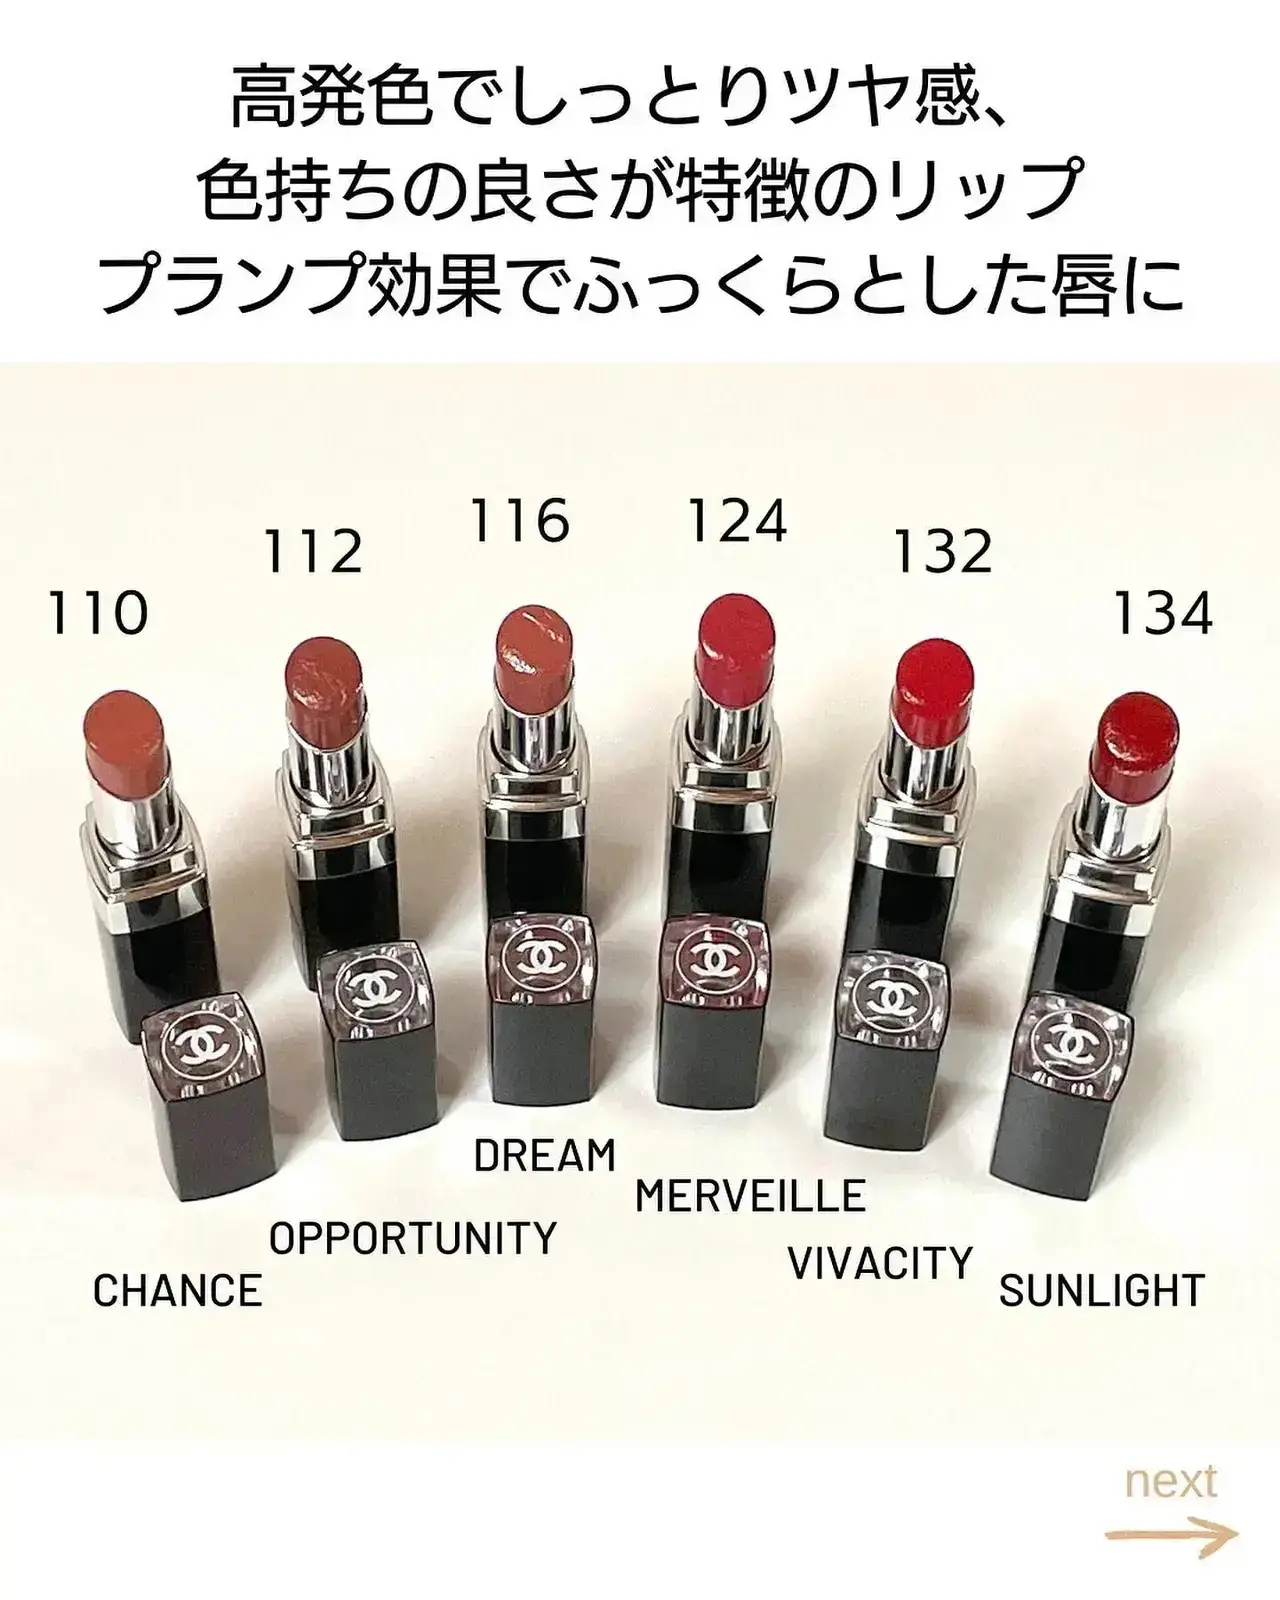 CHANEL ROUGE COCO BLOOM, Gallery posted by ［柏］kurumi イメコン